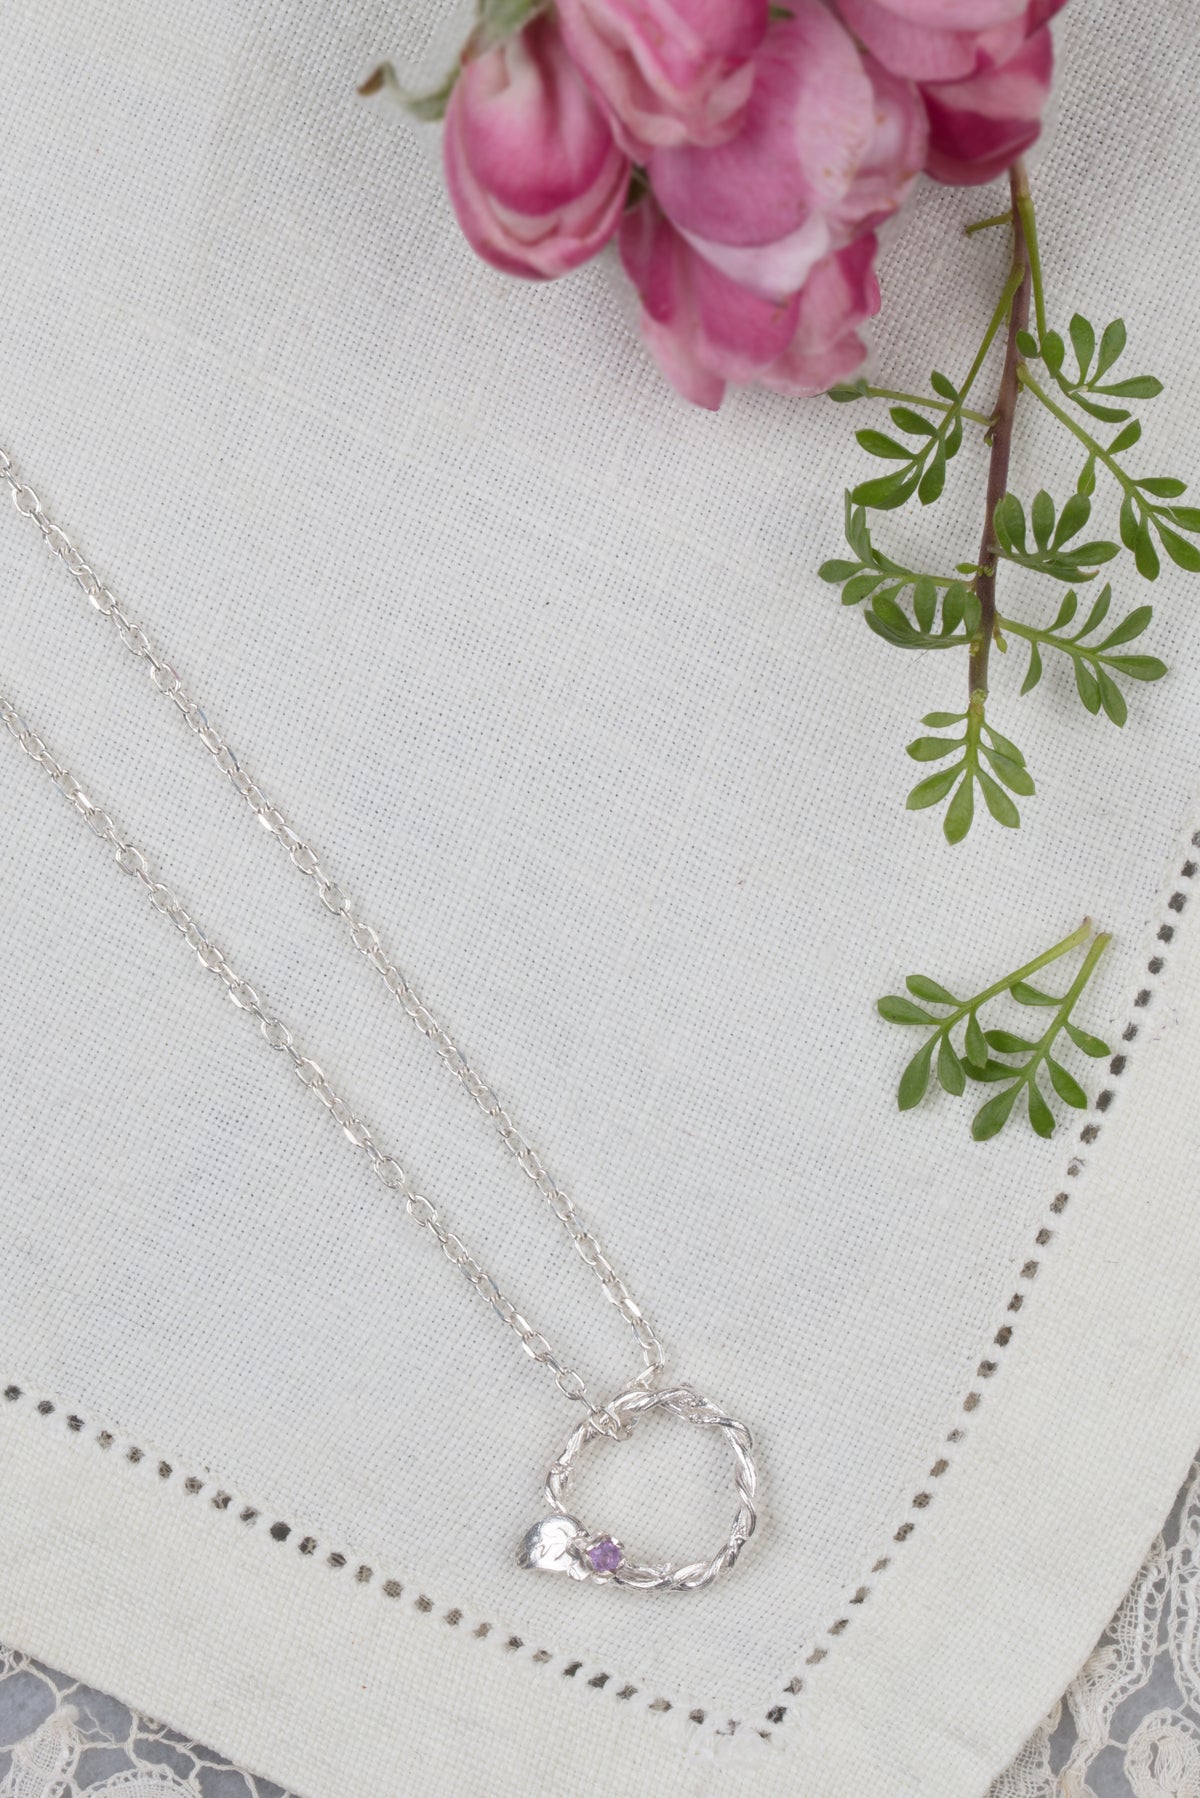 Entwined Vine Circle Necklace